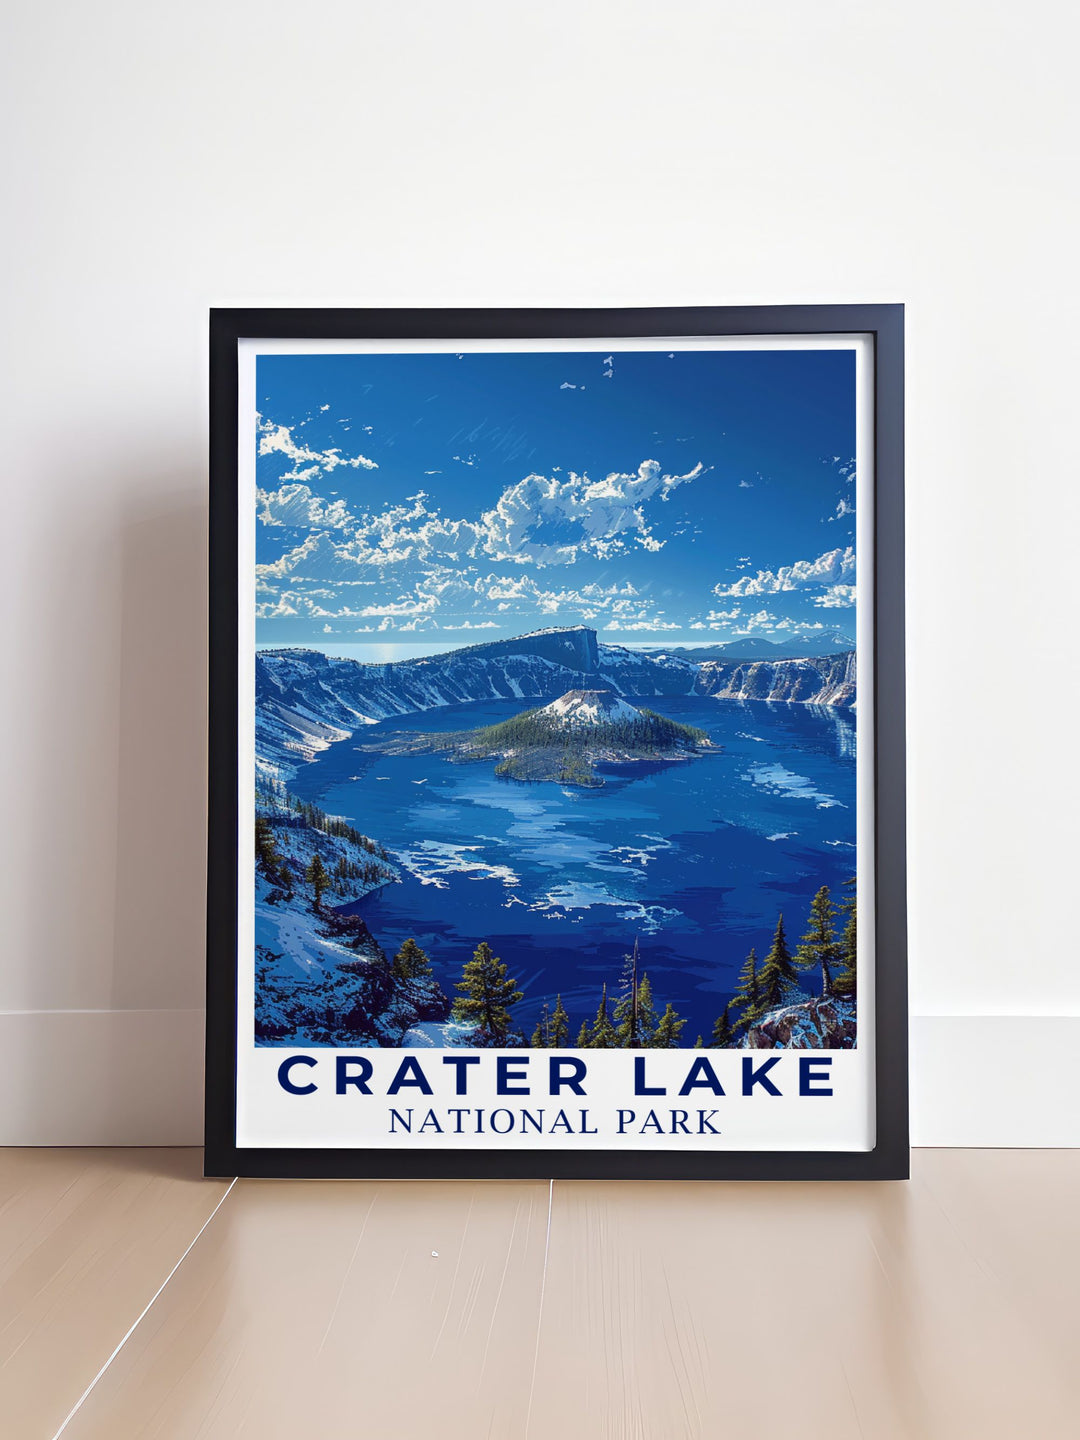 Captivating Crater Lake wall art highlighting the serene landscapes and majestic caldera. These National Park Posters are perfect for adding a touch of nature to your home decor and celebrating the beauty of Crater Lake.